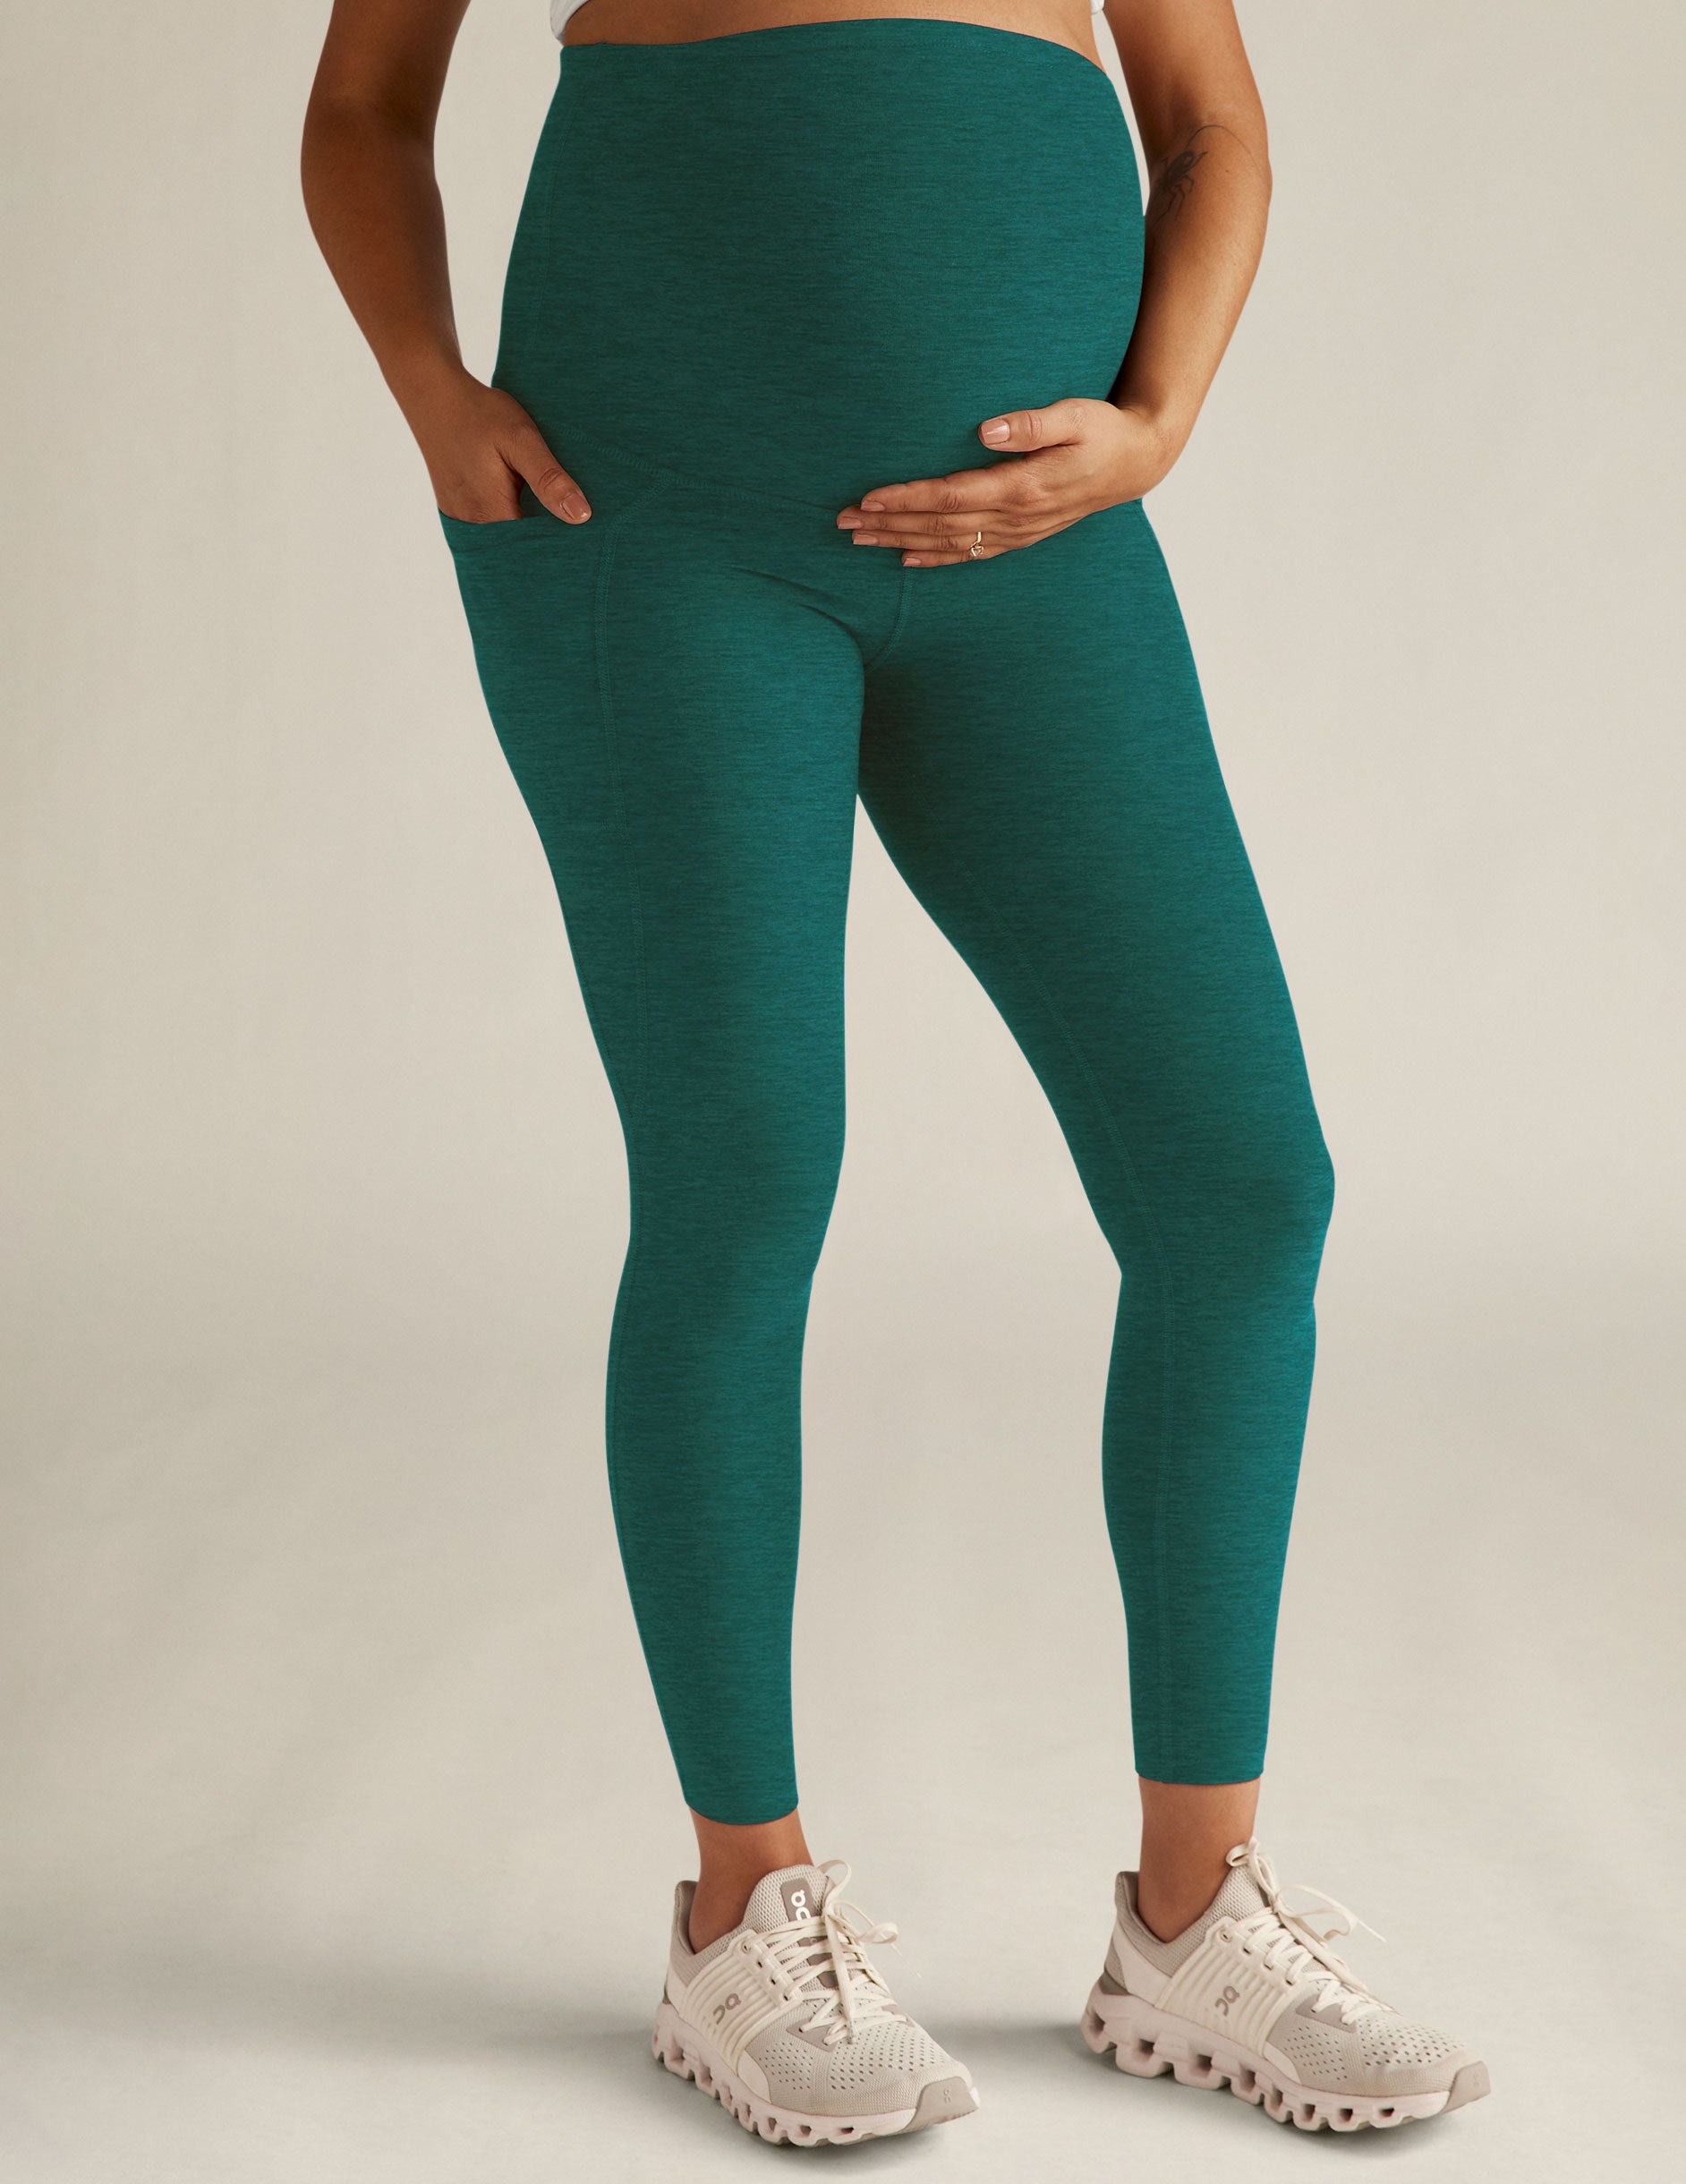 Maternity Leggings with POCKETS #maternitymusthaves #kindredbravely #shorts  